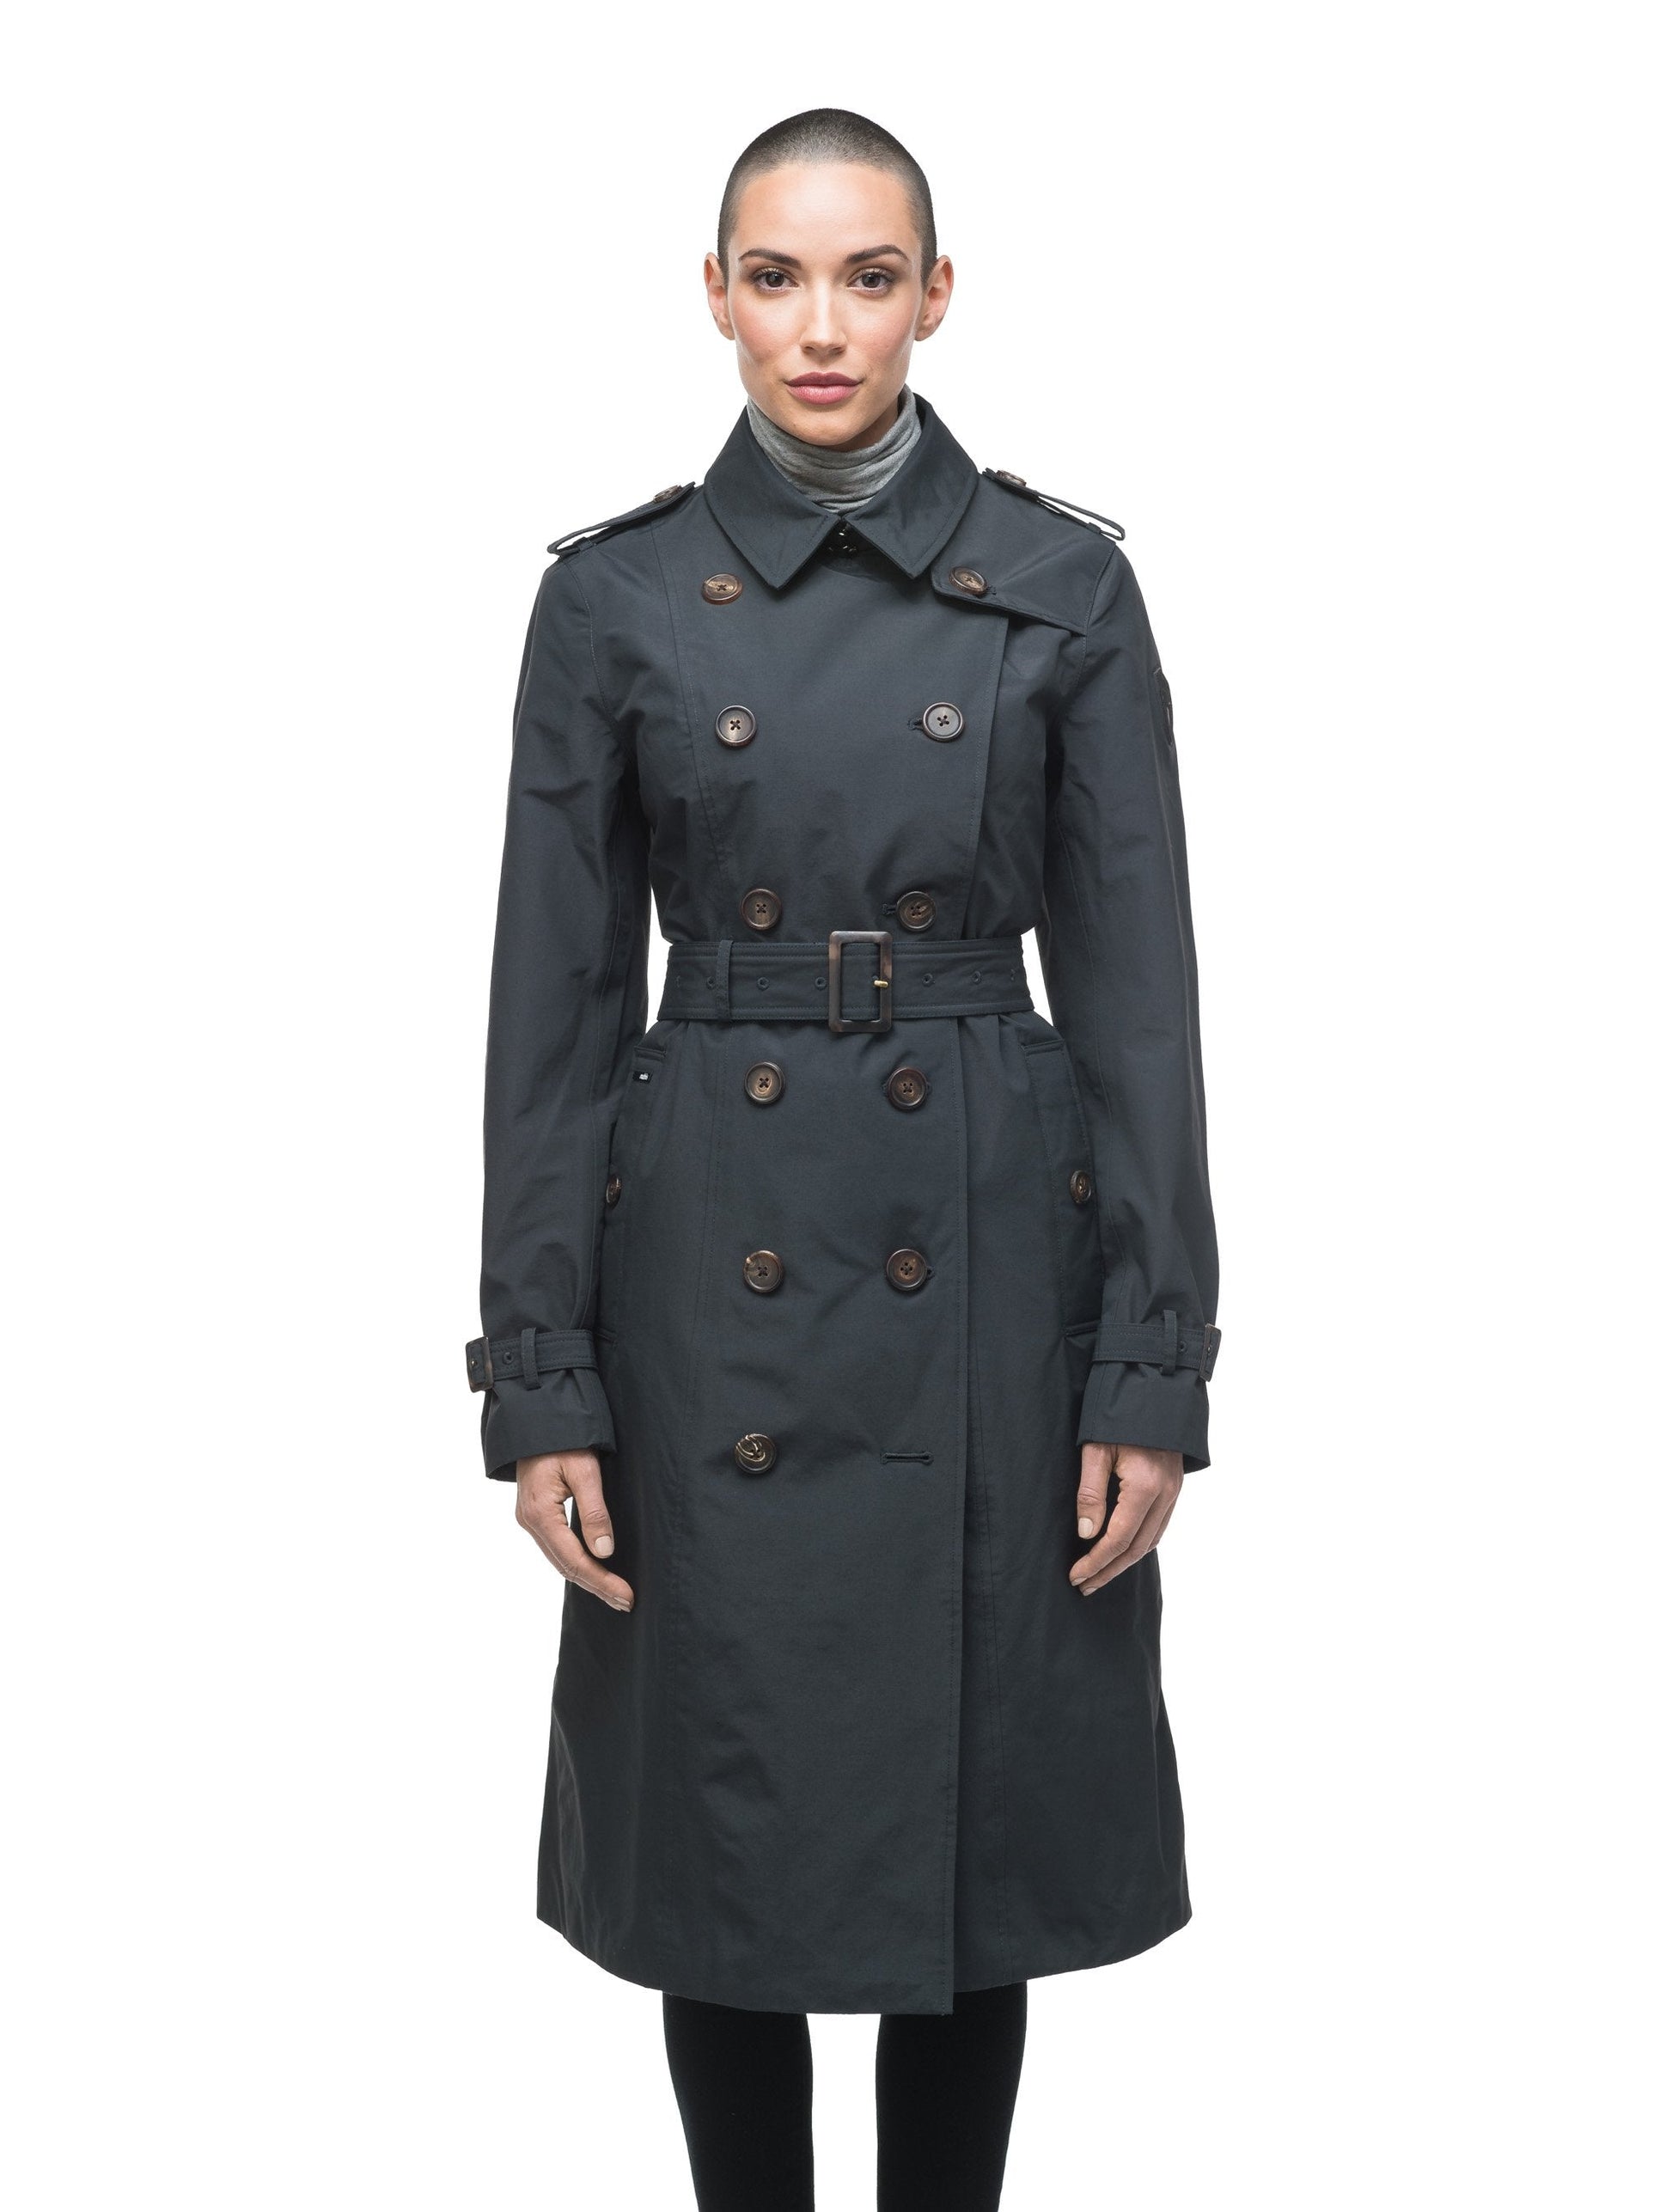 Women's knee length trench coat with removable belt in Black